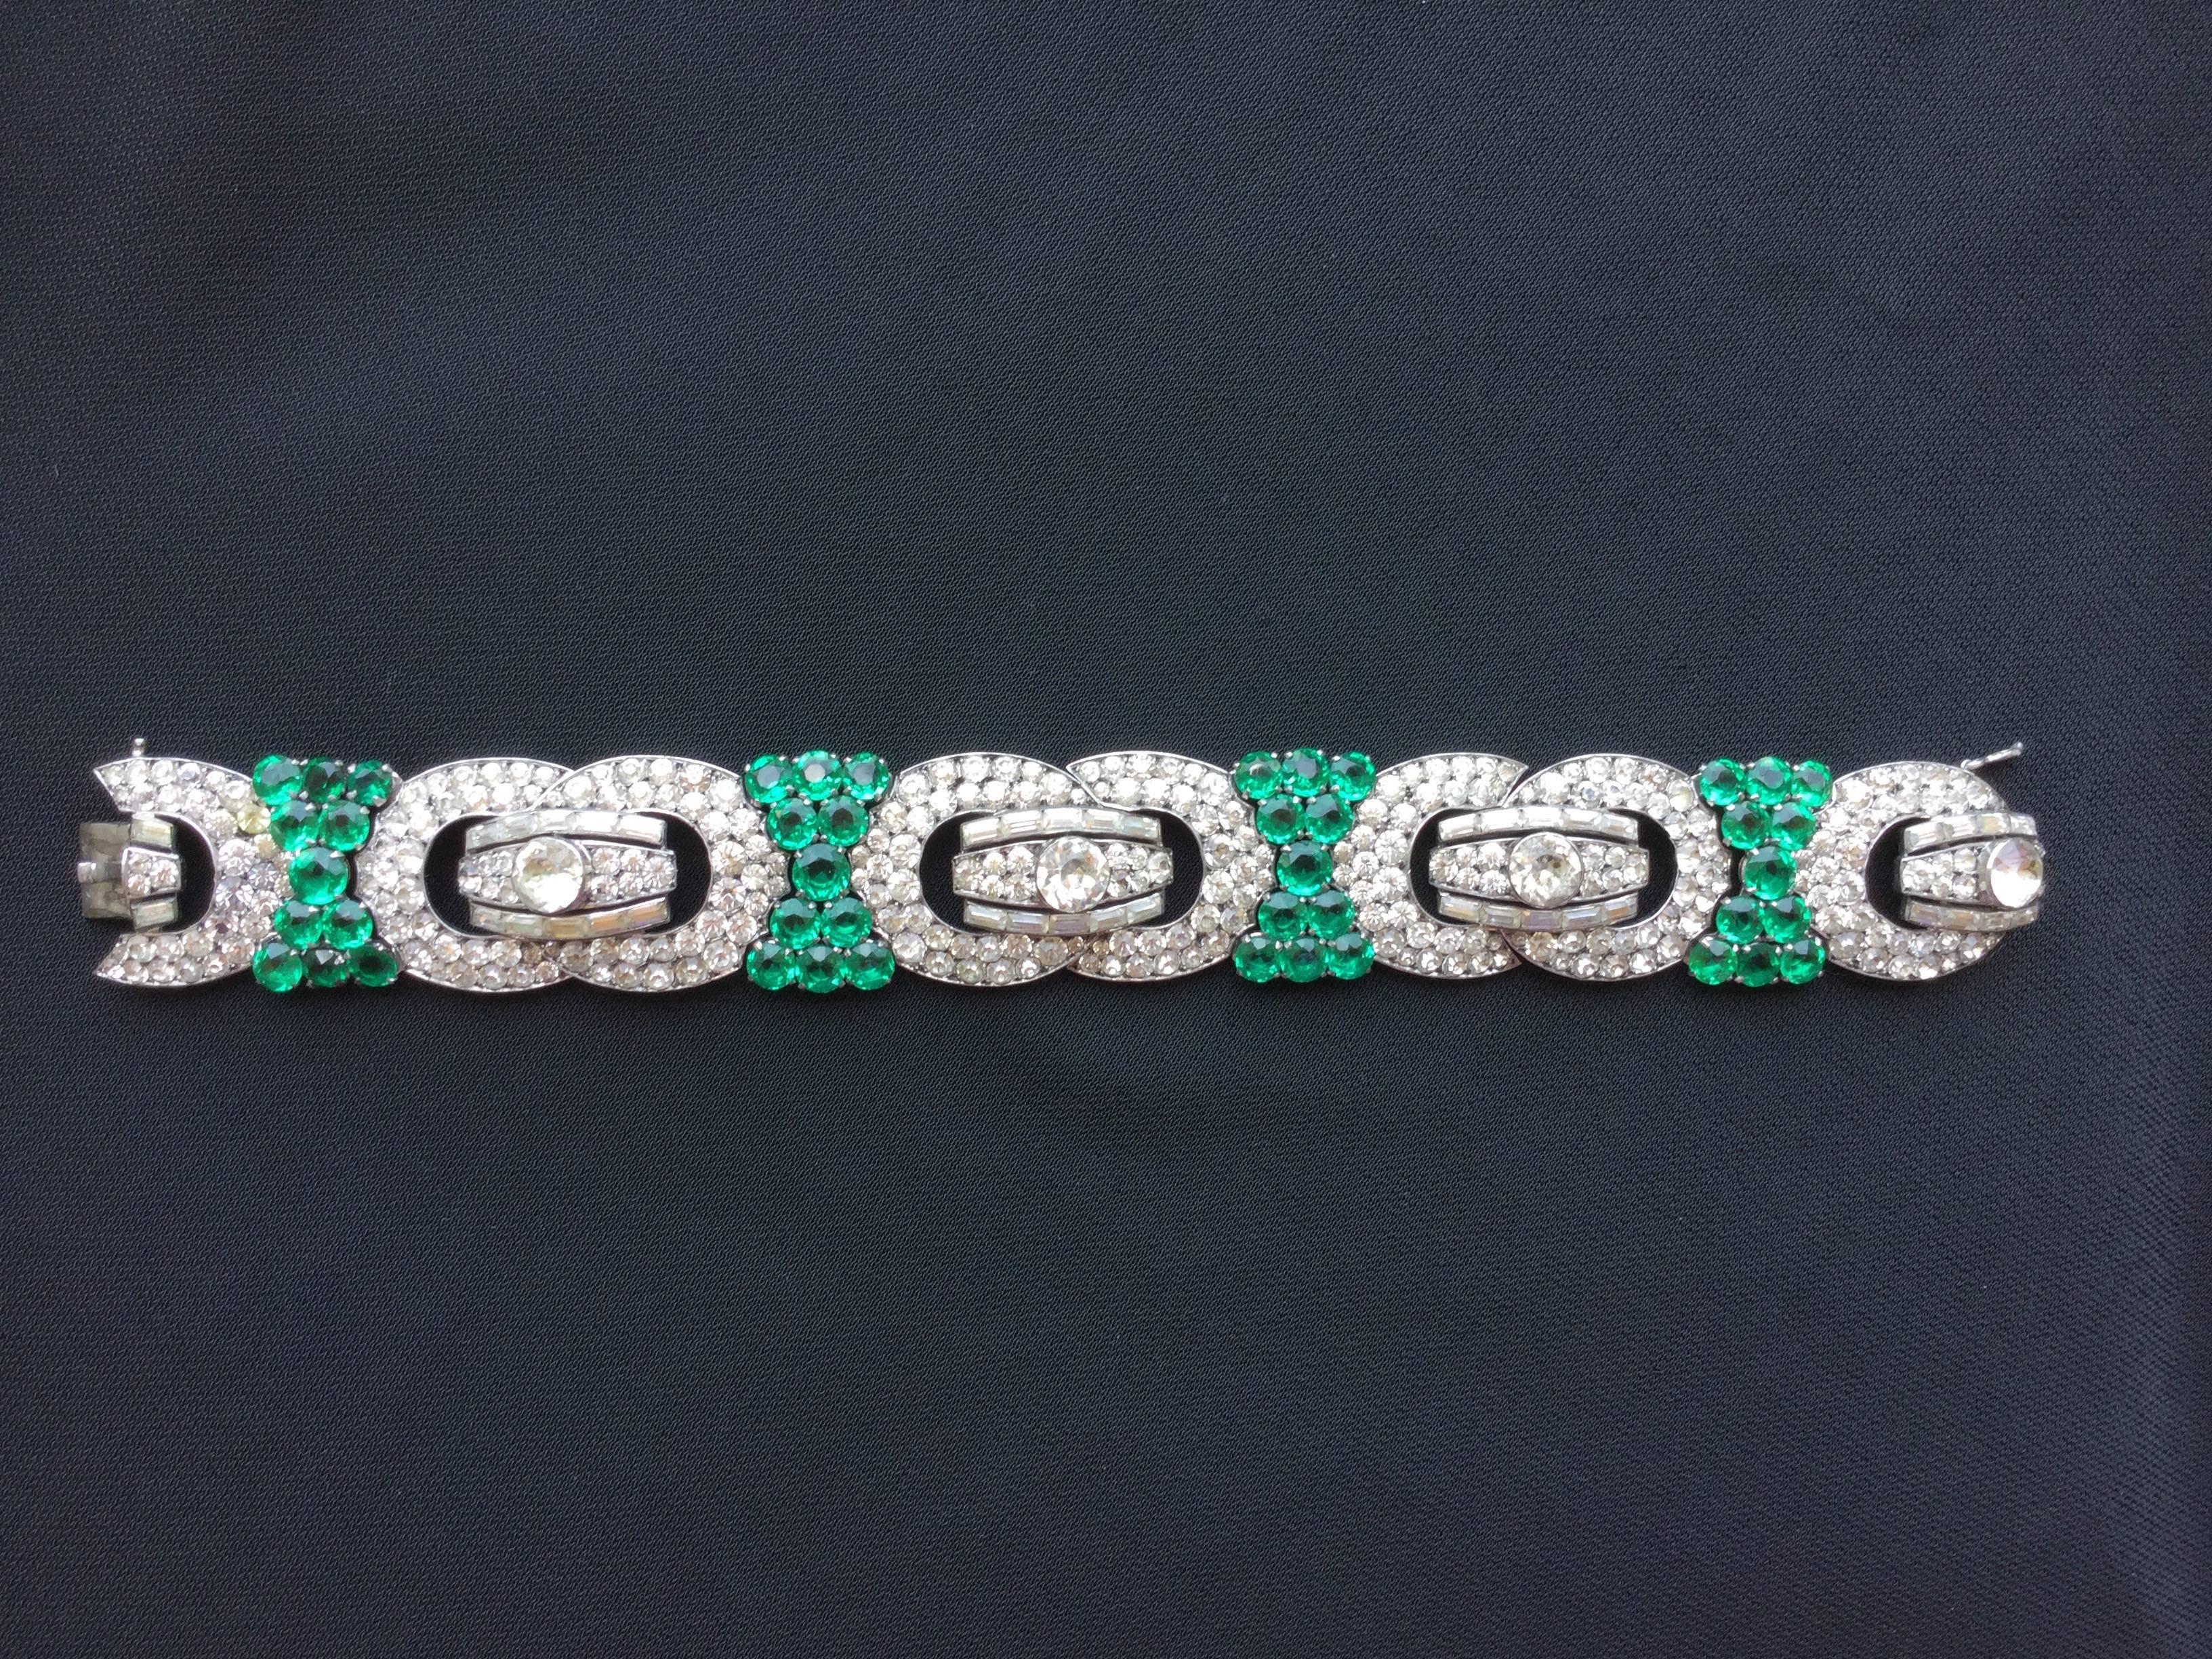 Knoll and Pregizer made some of the most exquisite Art Deco costume jewelry of the 1930's. Their pieces rarely appear on the market today. This gorgeous bracelet has faux emerald and diamond pastes of the finest quality all handset on sterling